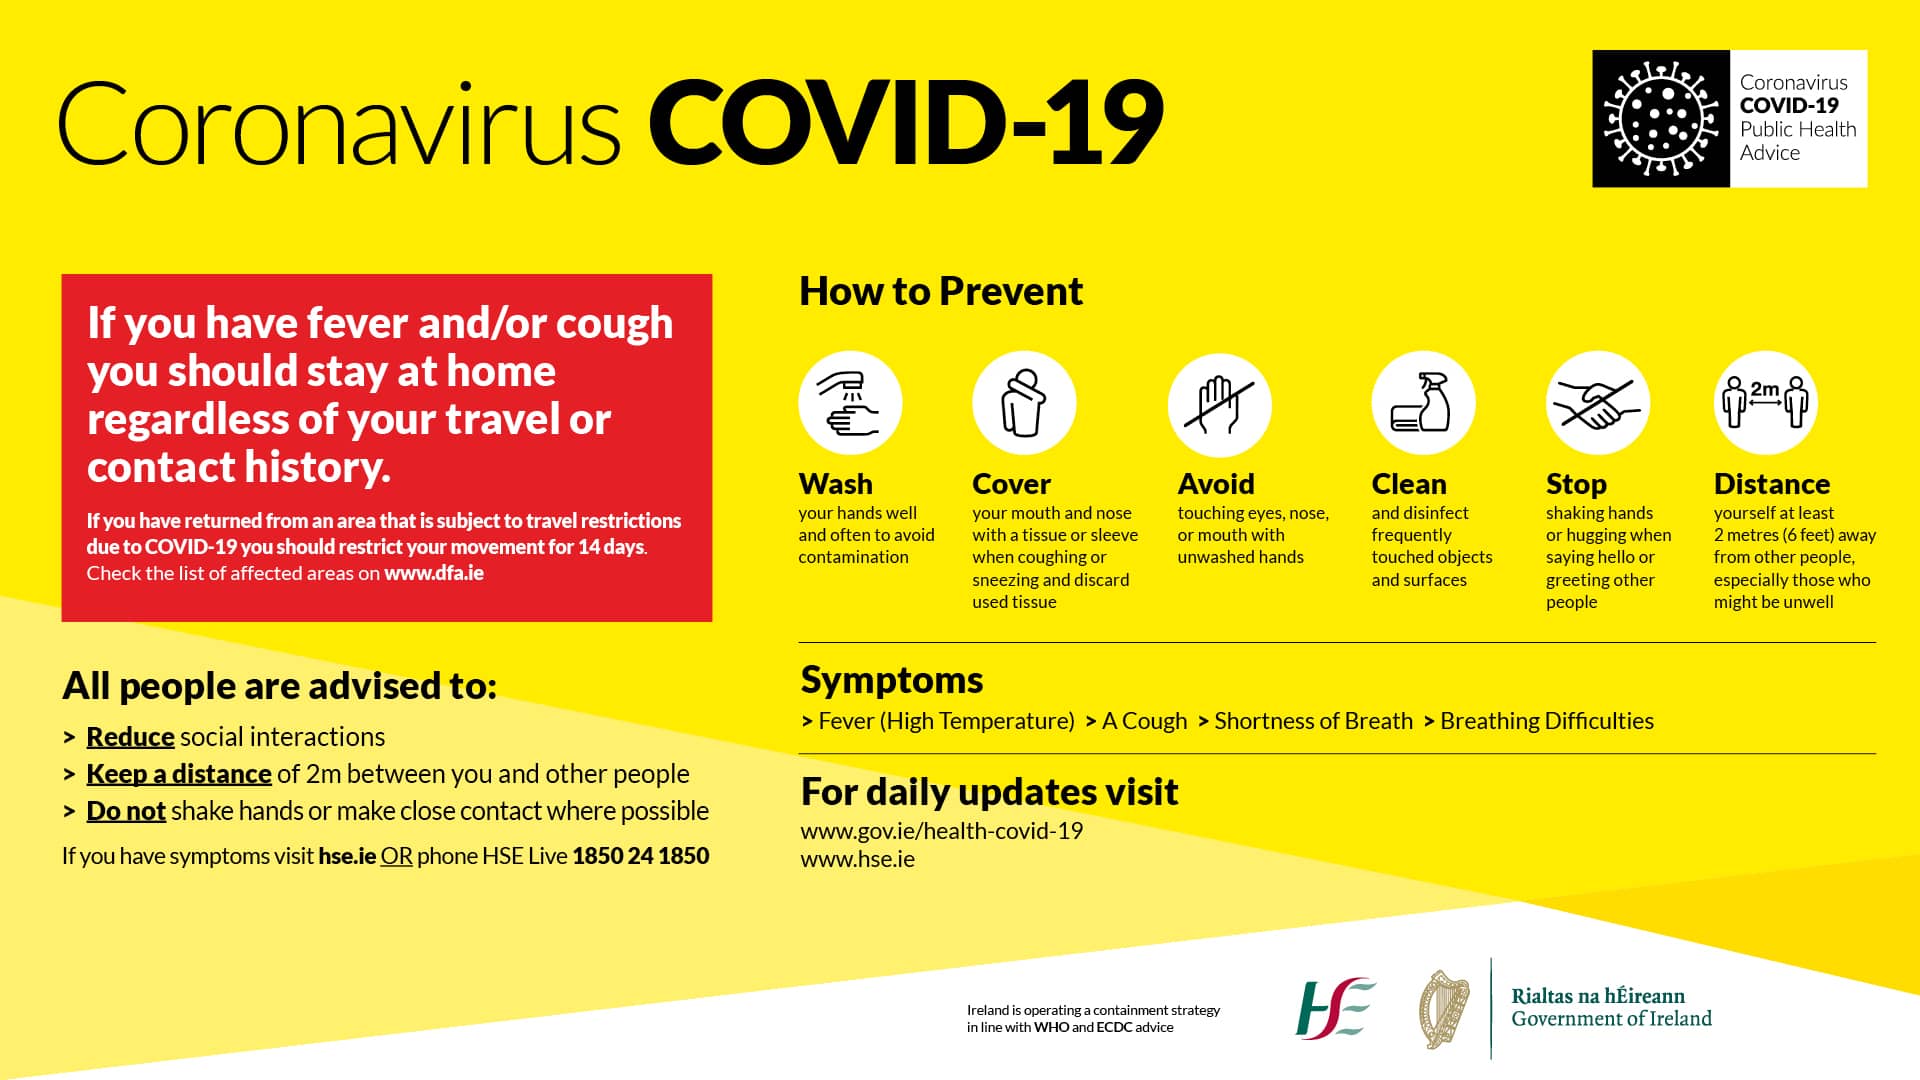 COVID-19 guidelines